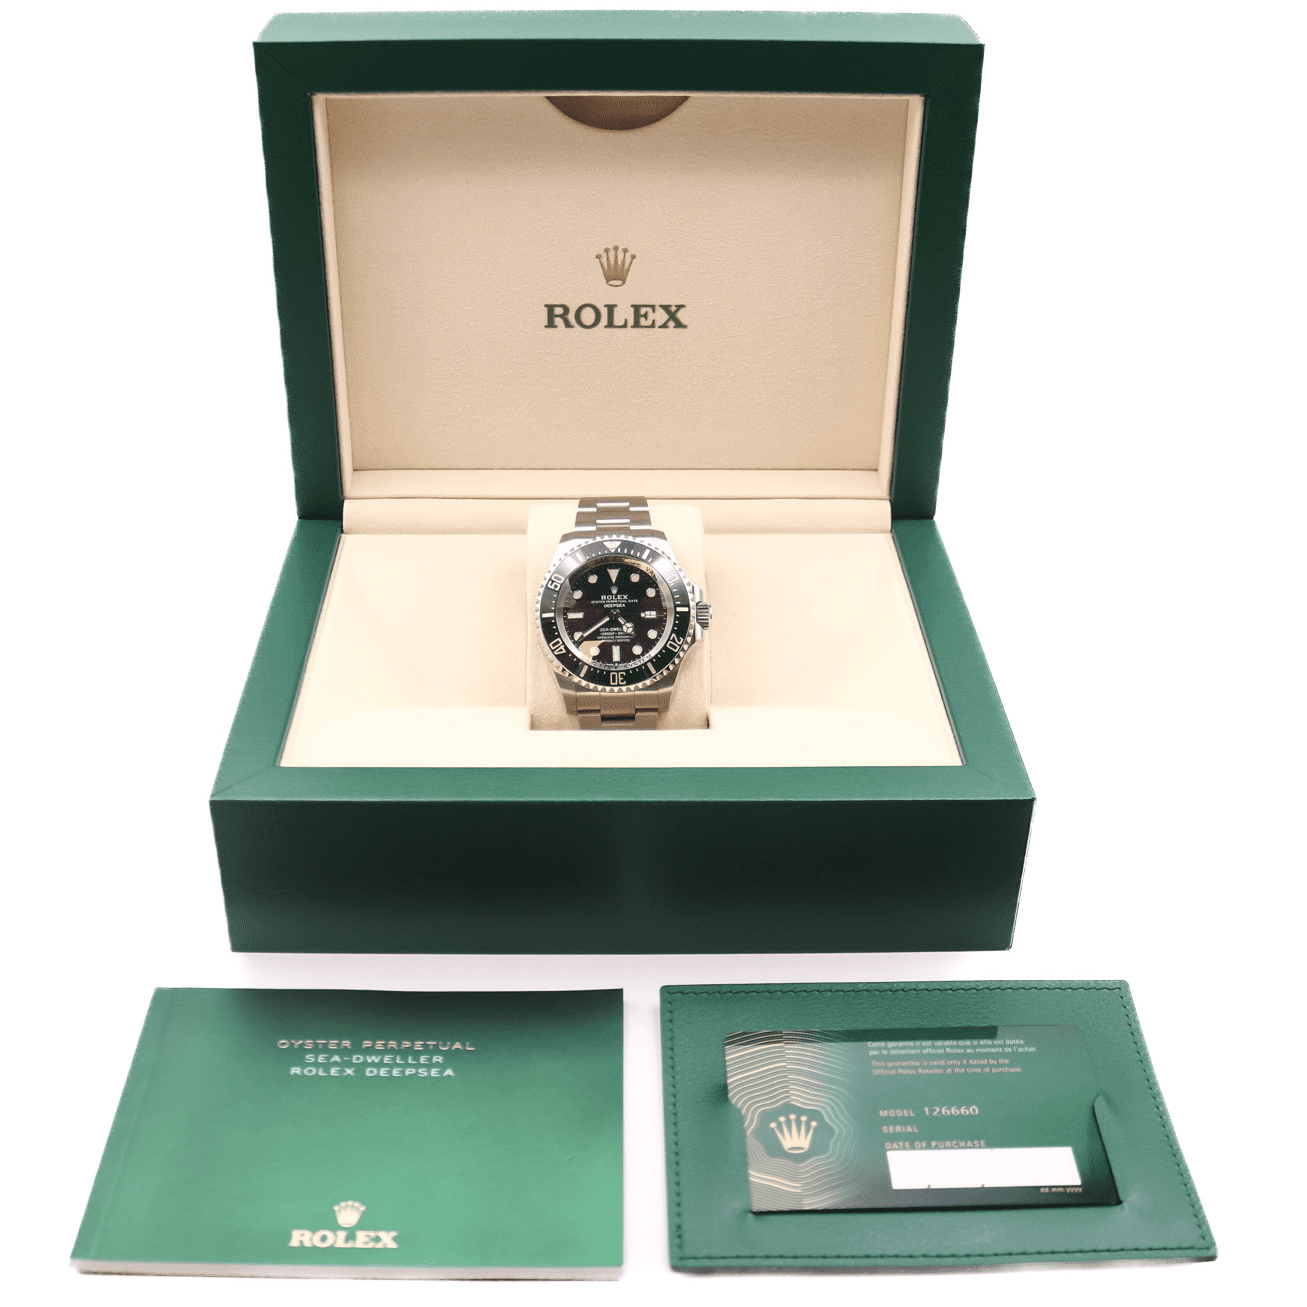 Rolex Deepsea in box with certificates